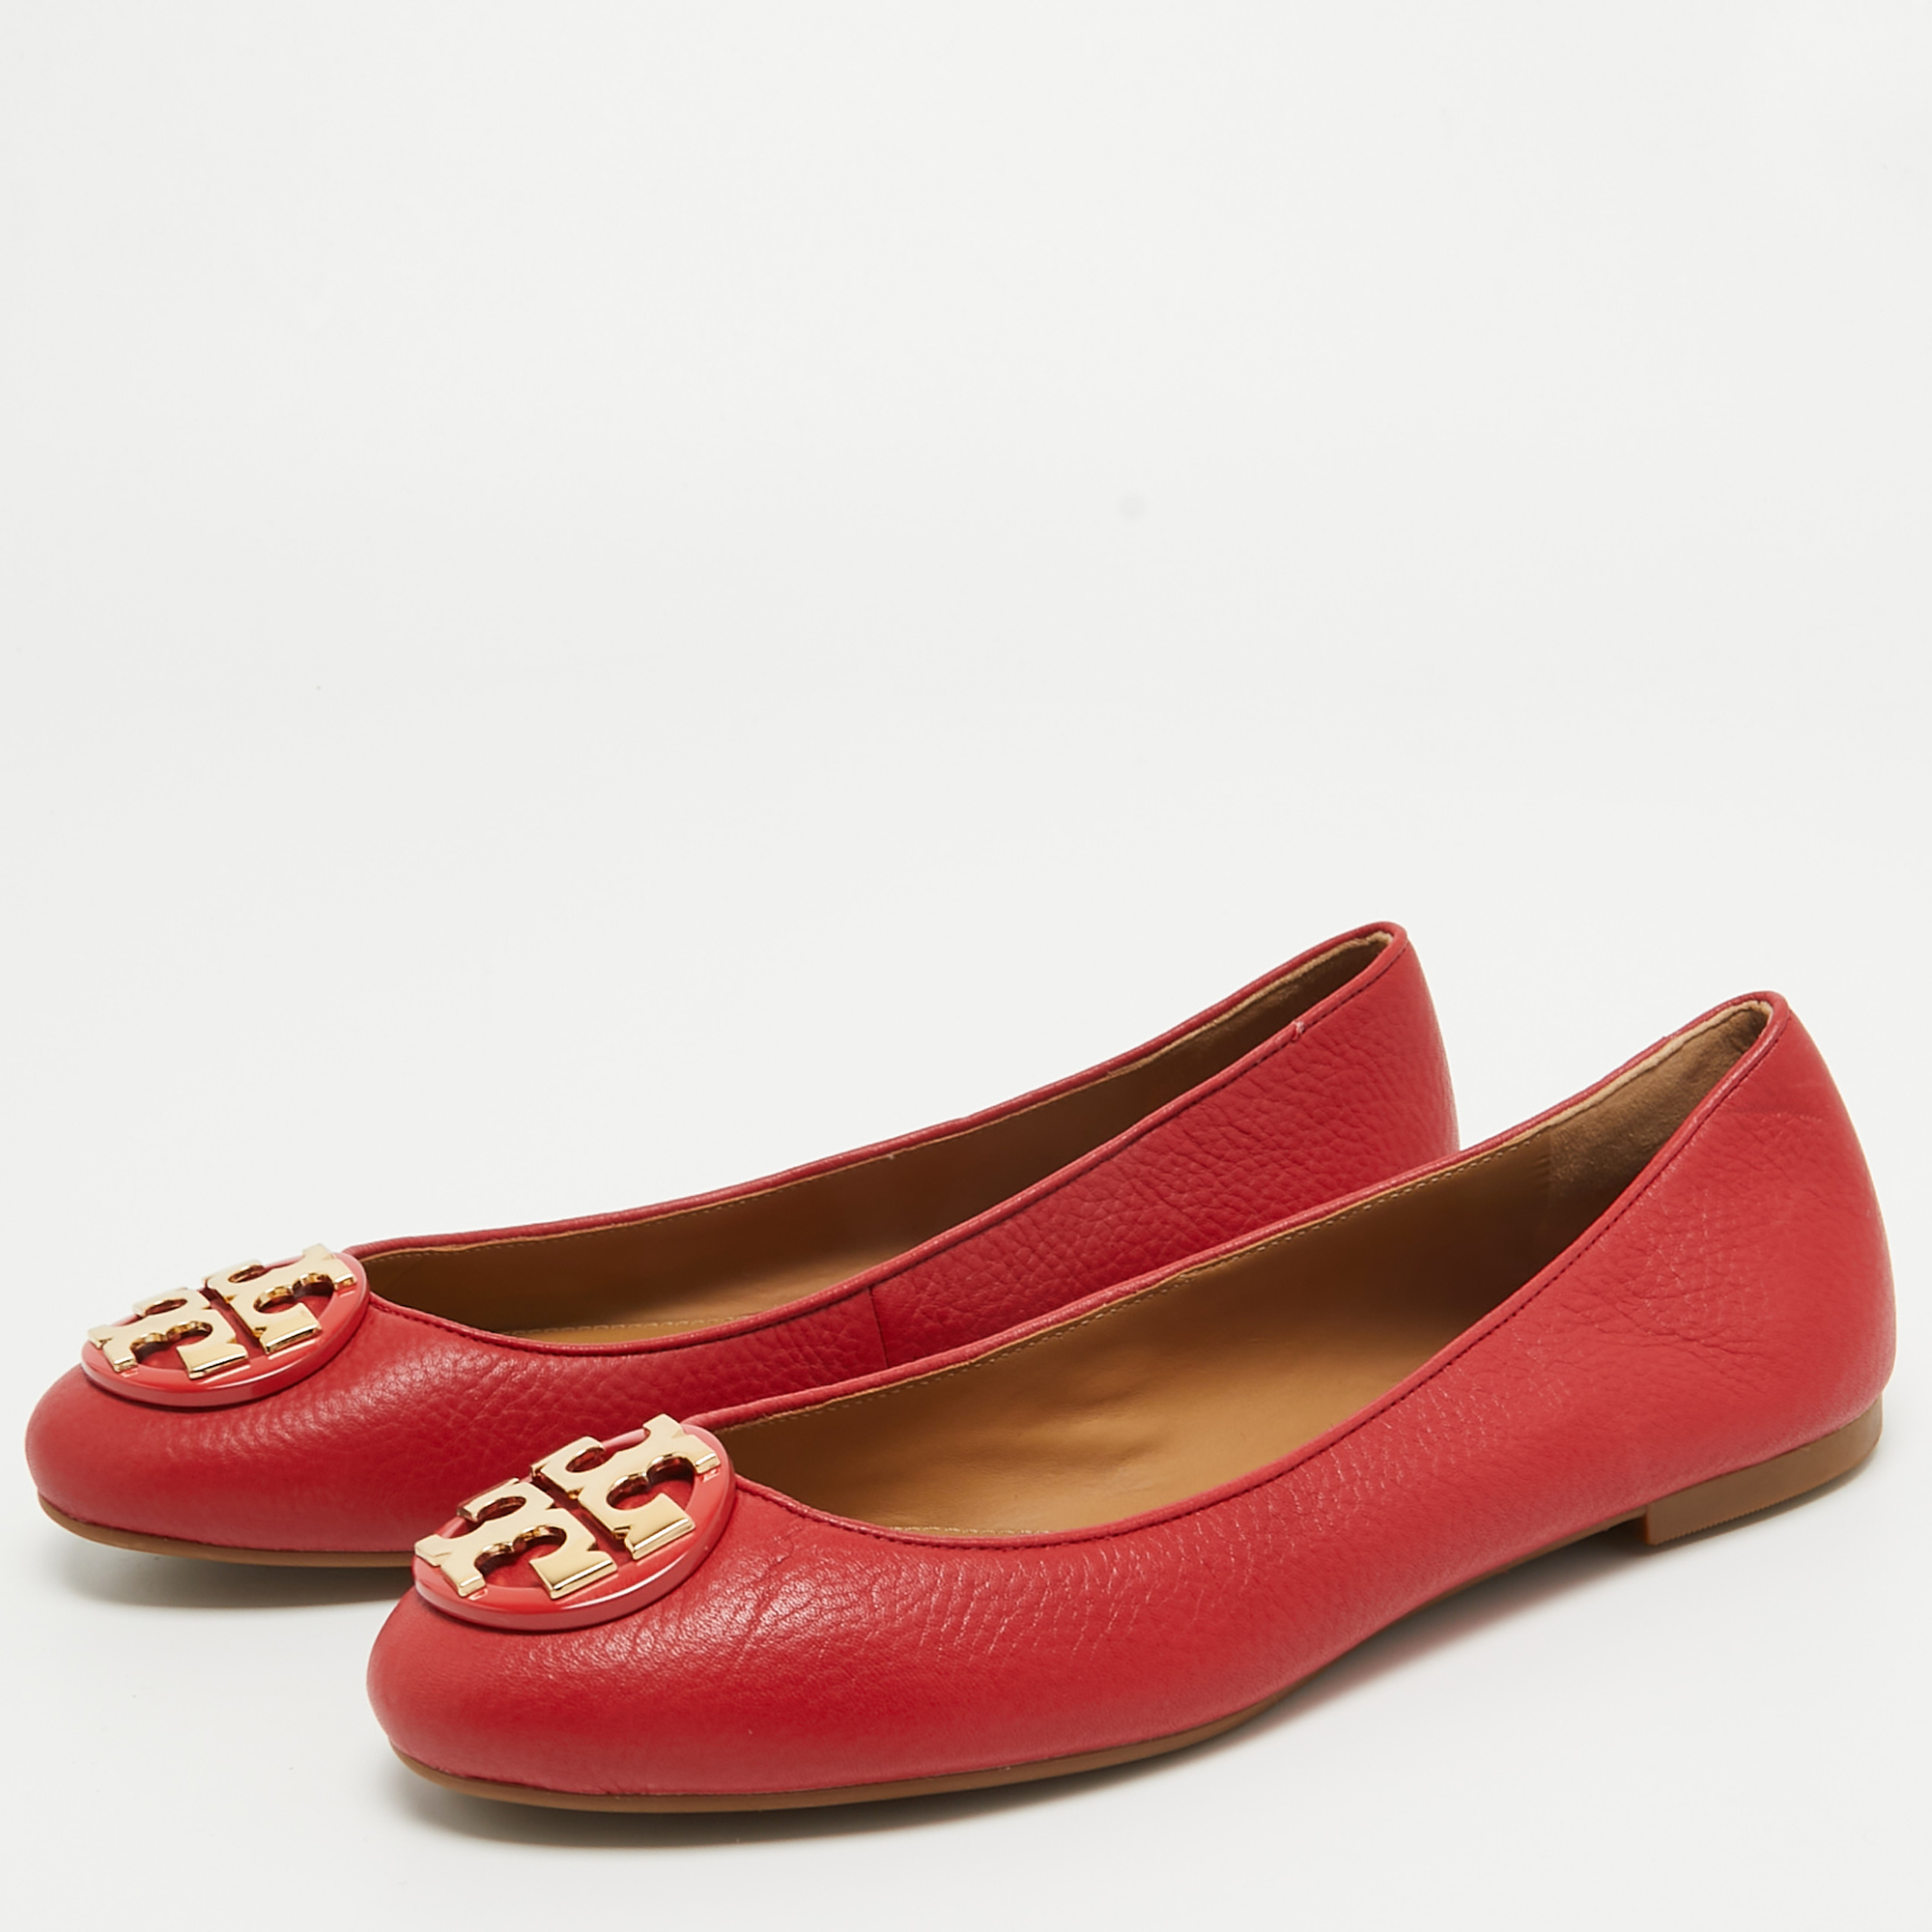 

Tory Burch Red Leather Reva Ballet Flats Size